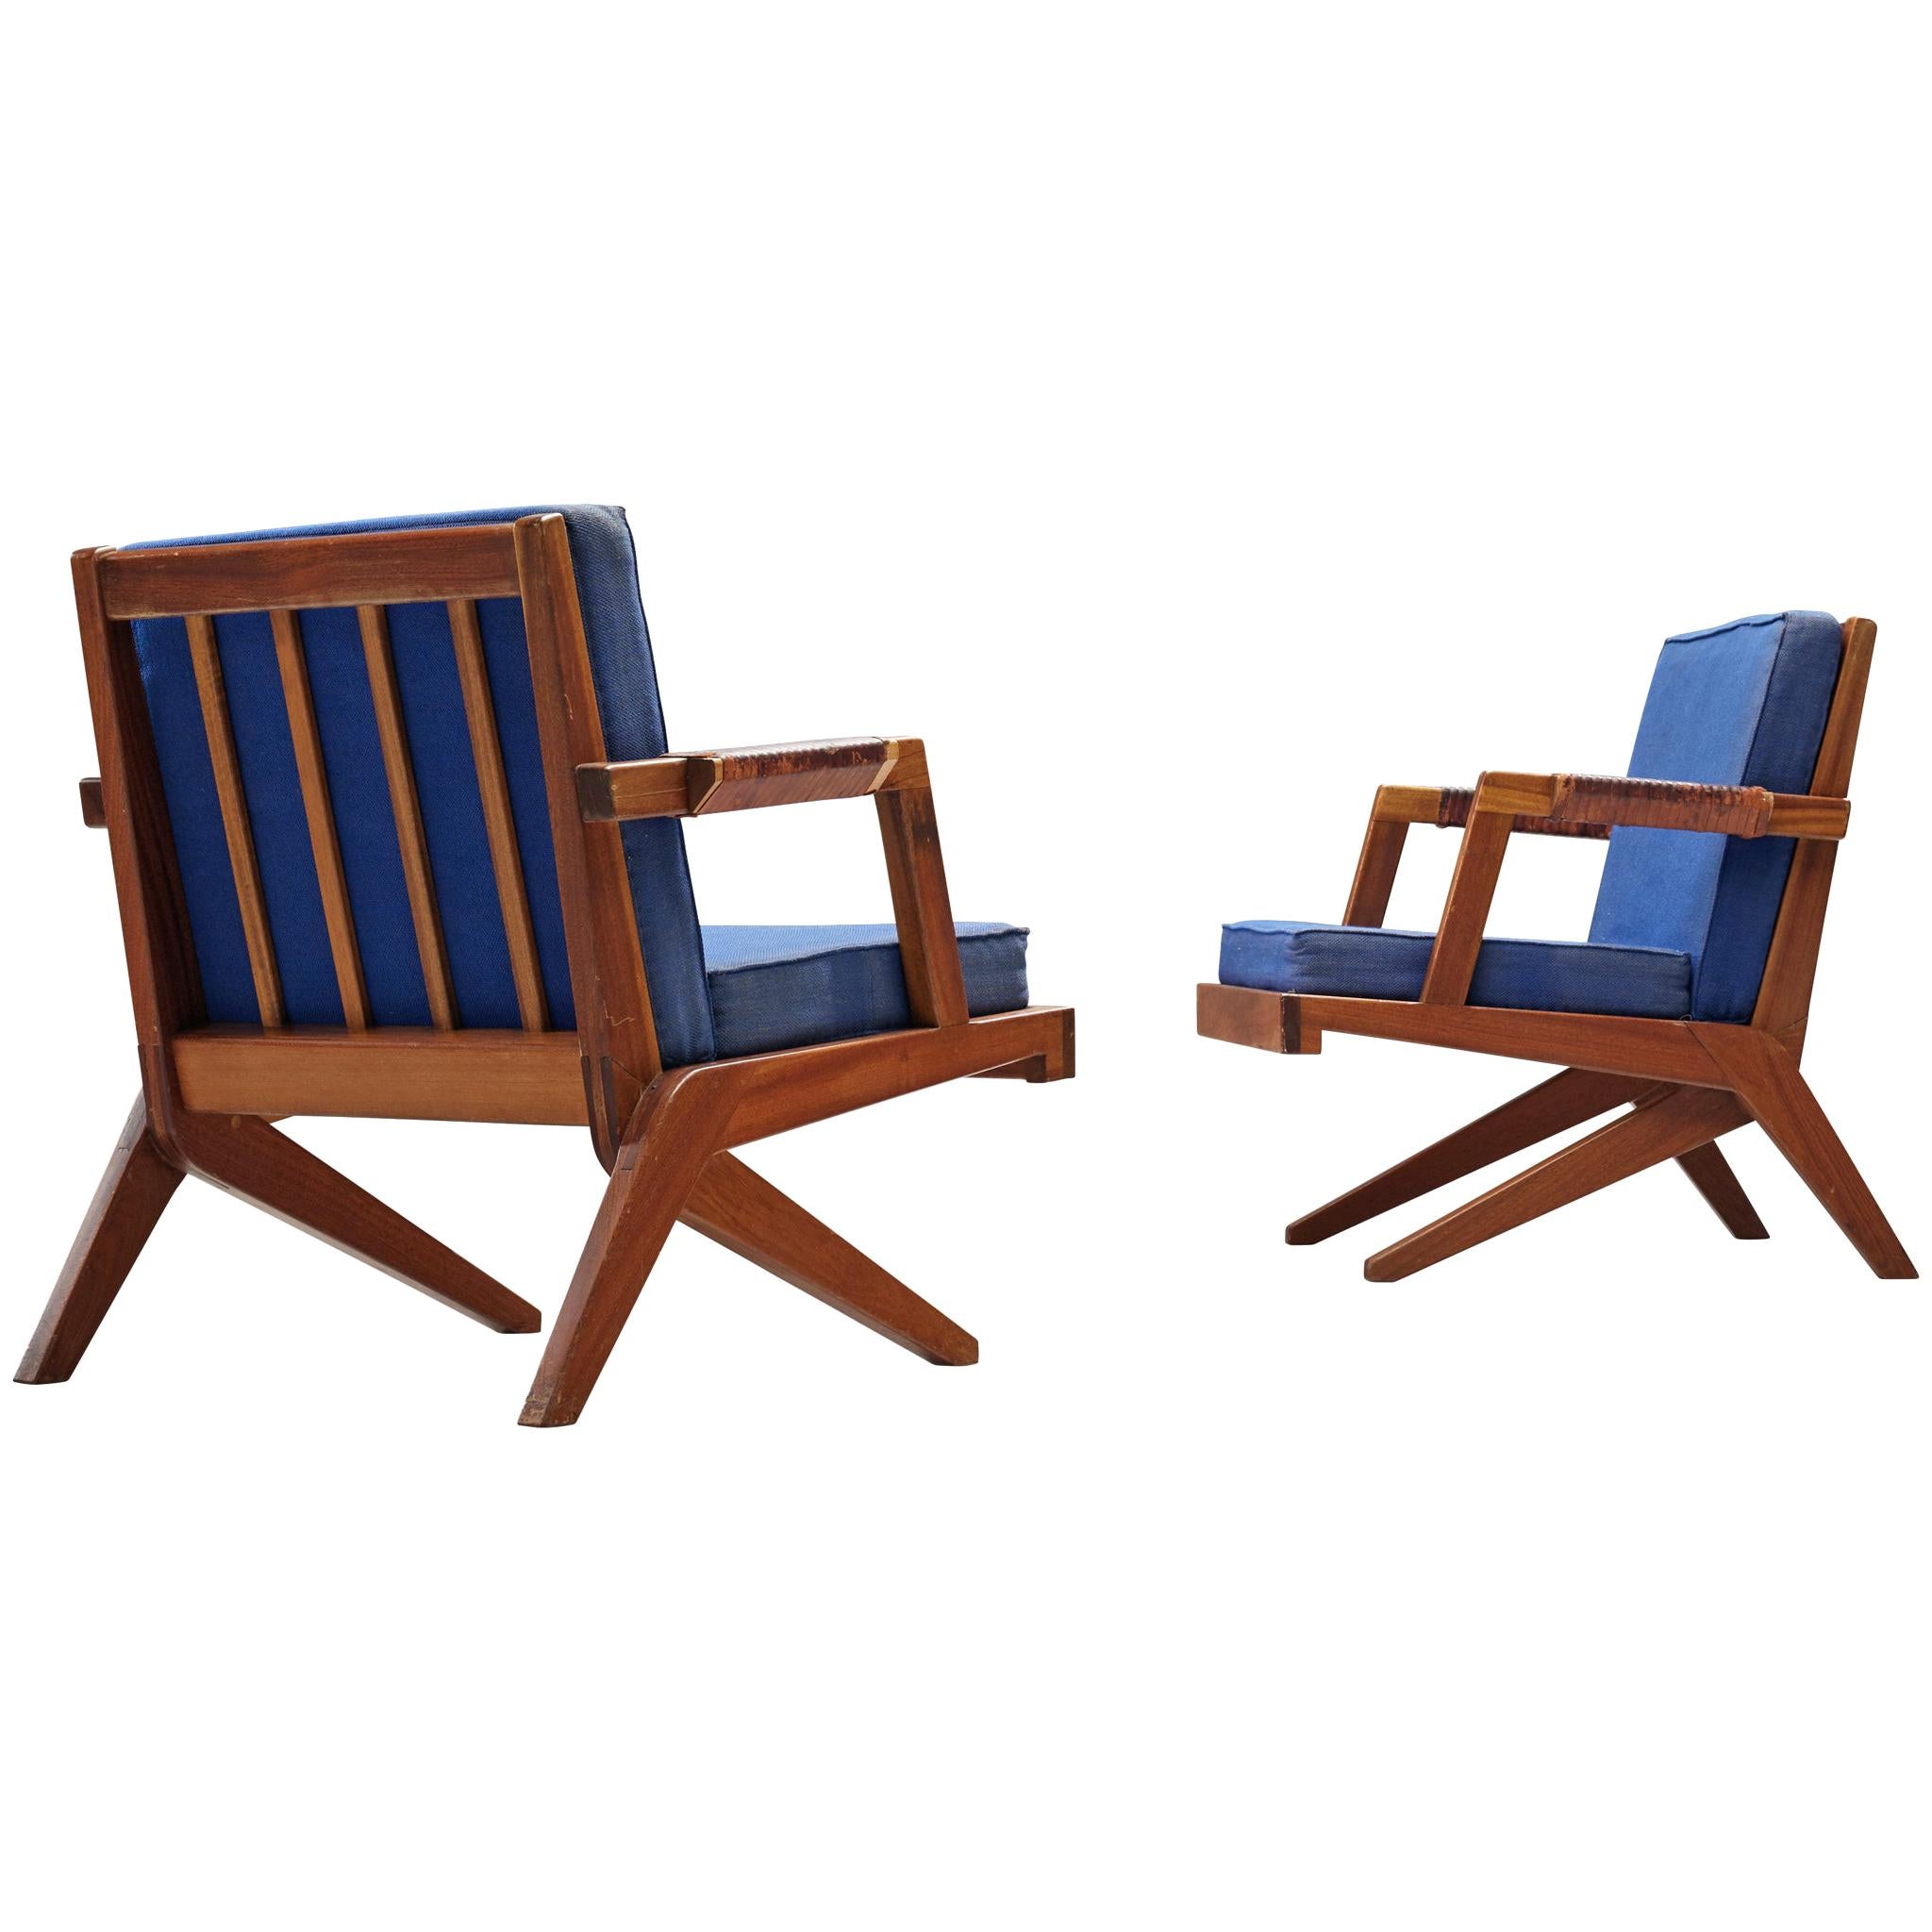 Olavi Hanninen 'Boomerang' Chairs with Blue Upholstery